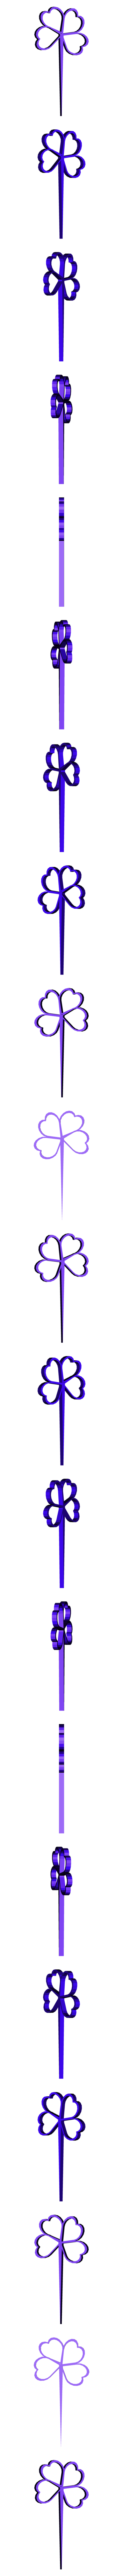 4leafclover_pick_large_3dprintny.stl Download free STL file Lucky St. Patrick's Day Party Picks and Swizzle Sticks • 3D printable template, barb_3dprintny